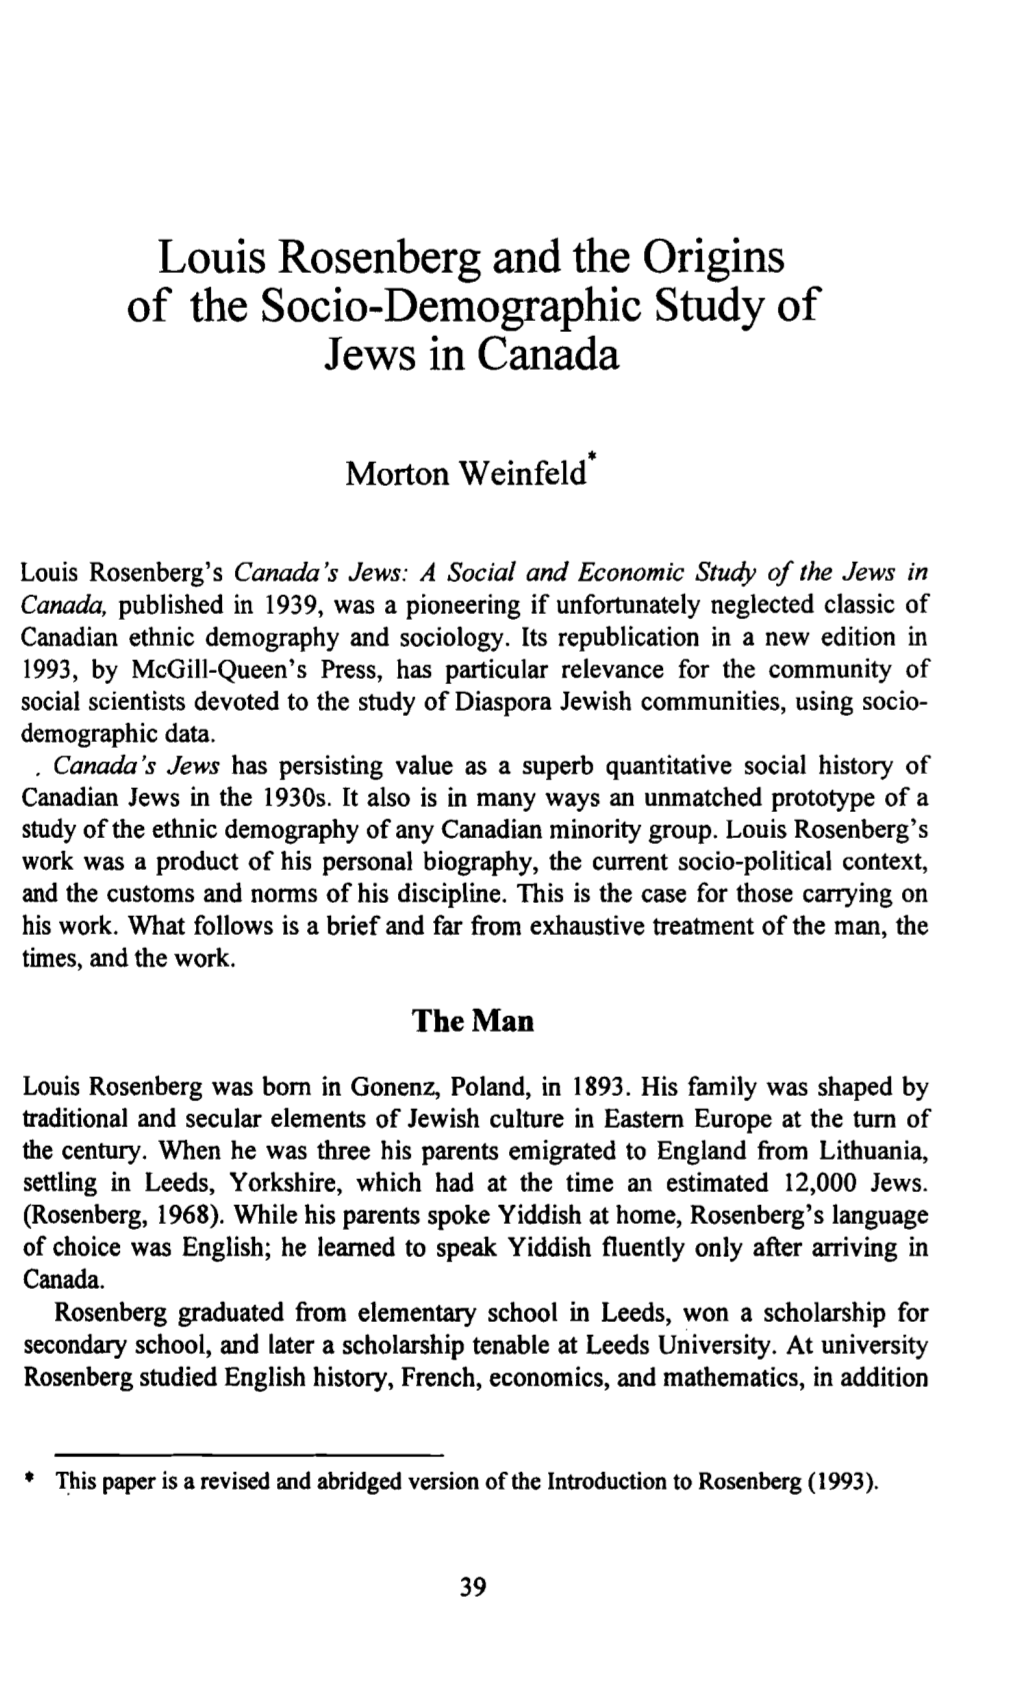 Louis Rosenberg and the Origins of the Socio-Demographic Study of Jews in Canada